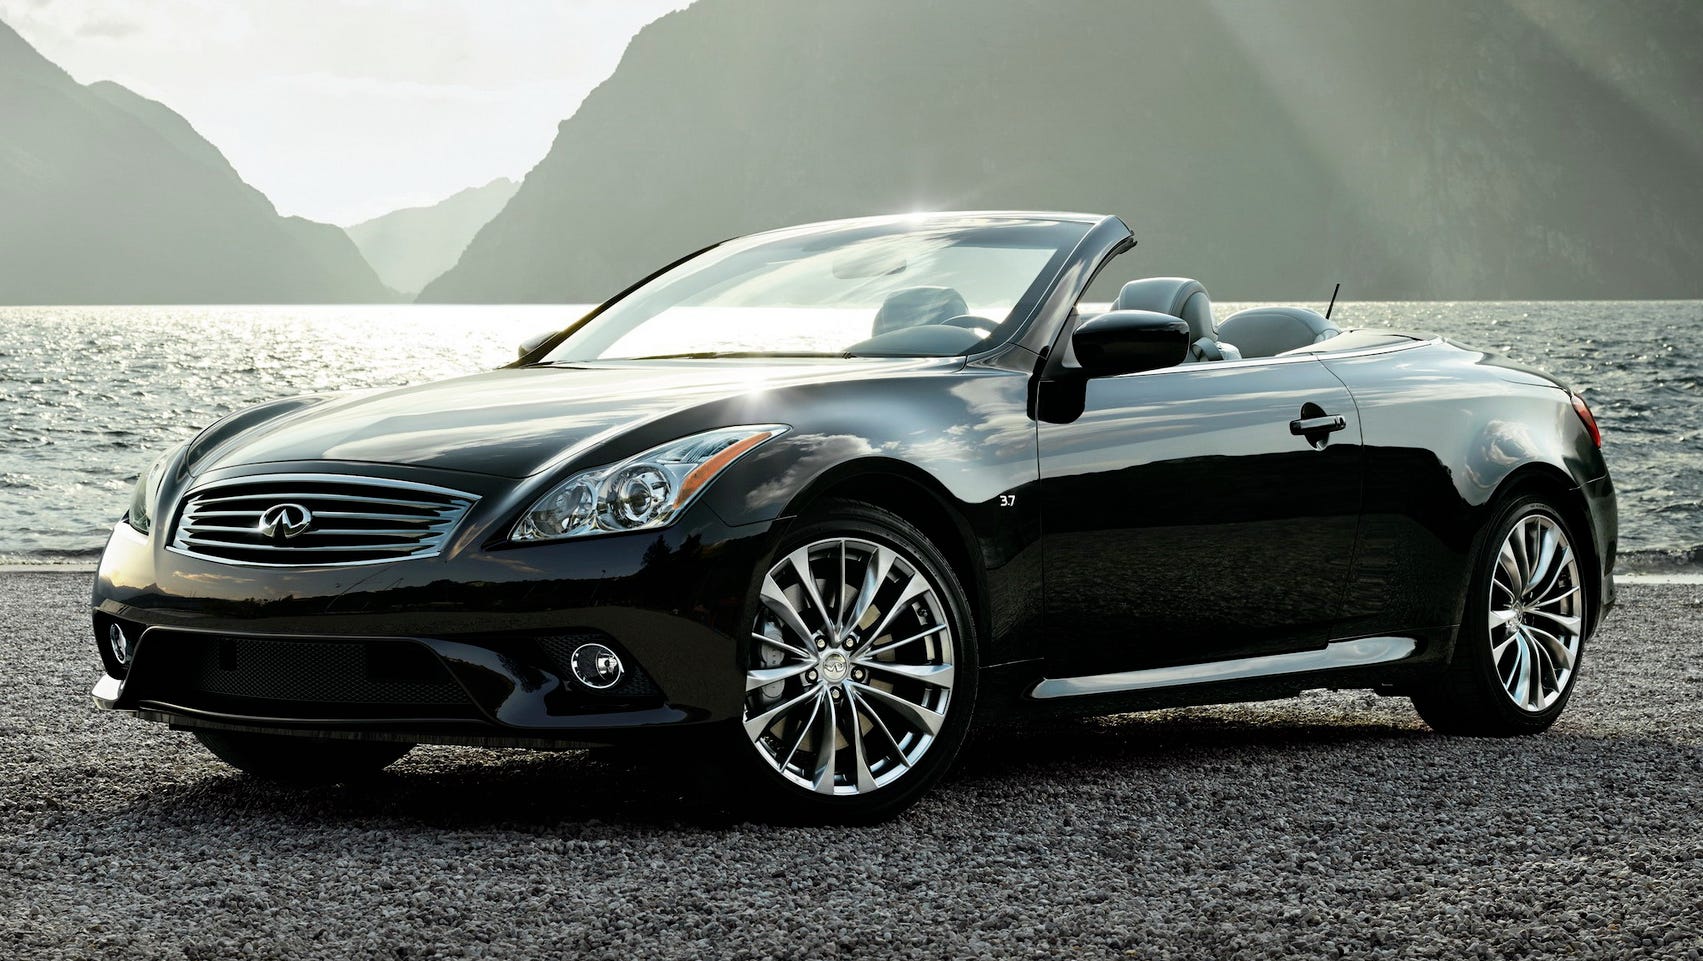 2014 Infiniti Q60 brings luxury to a convertible